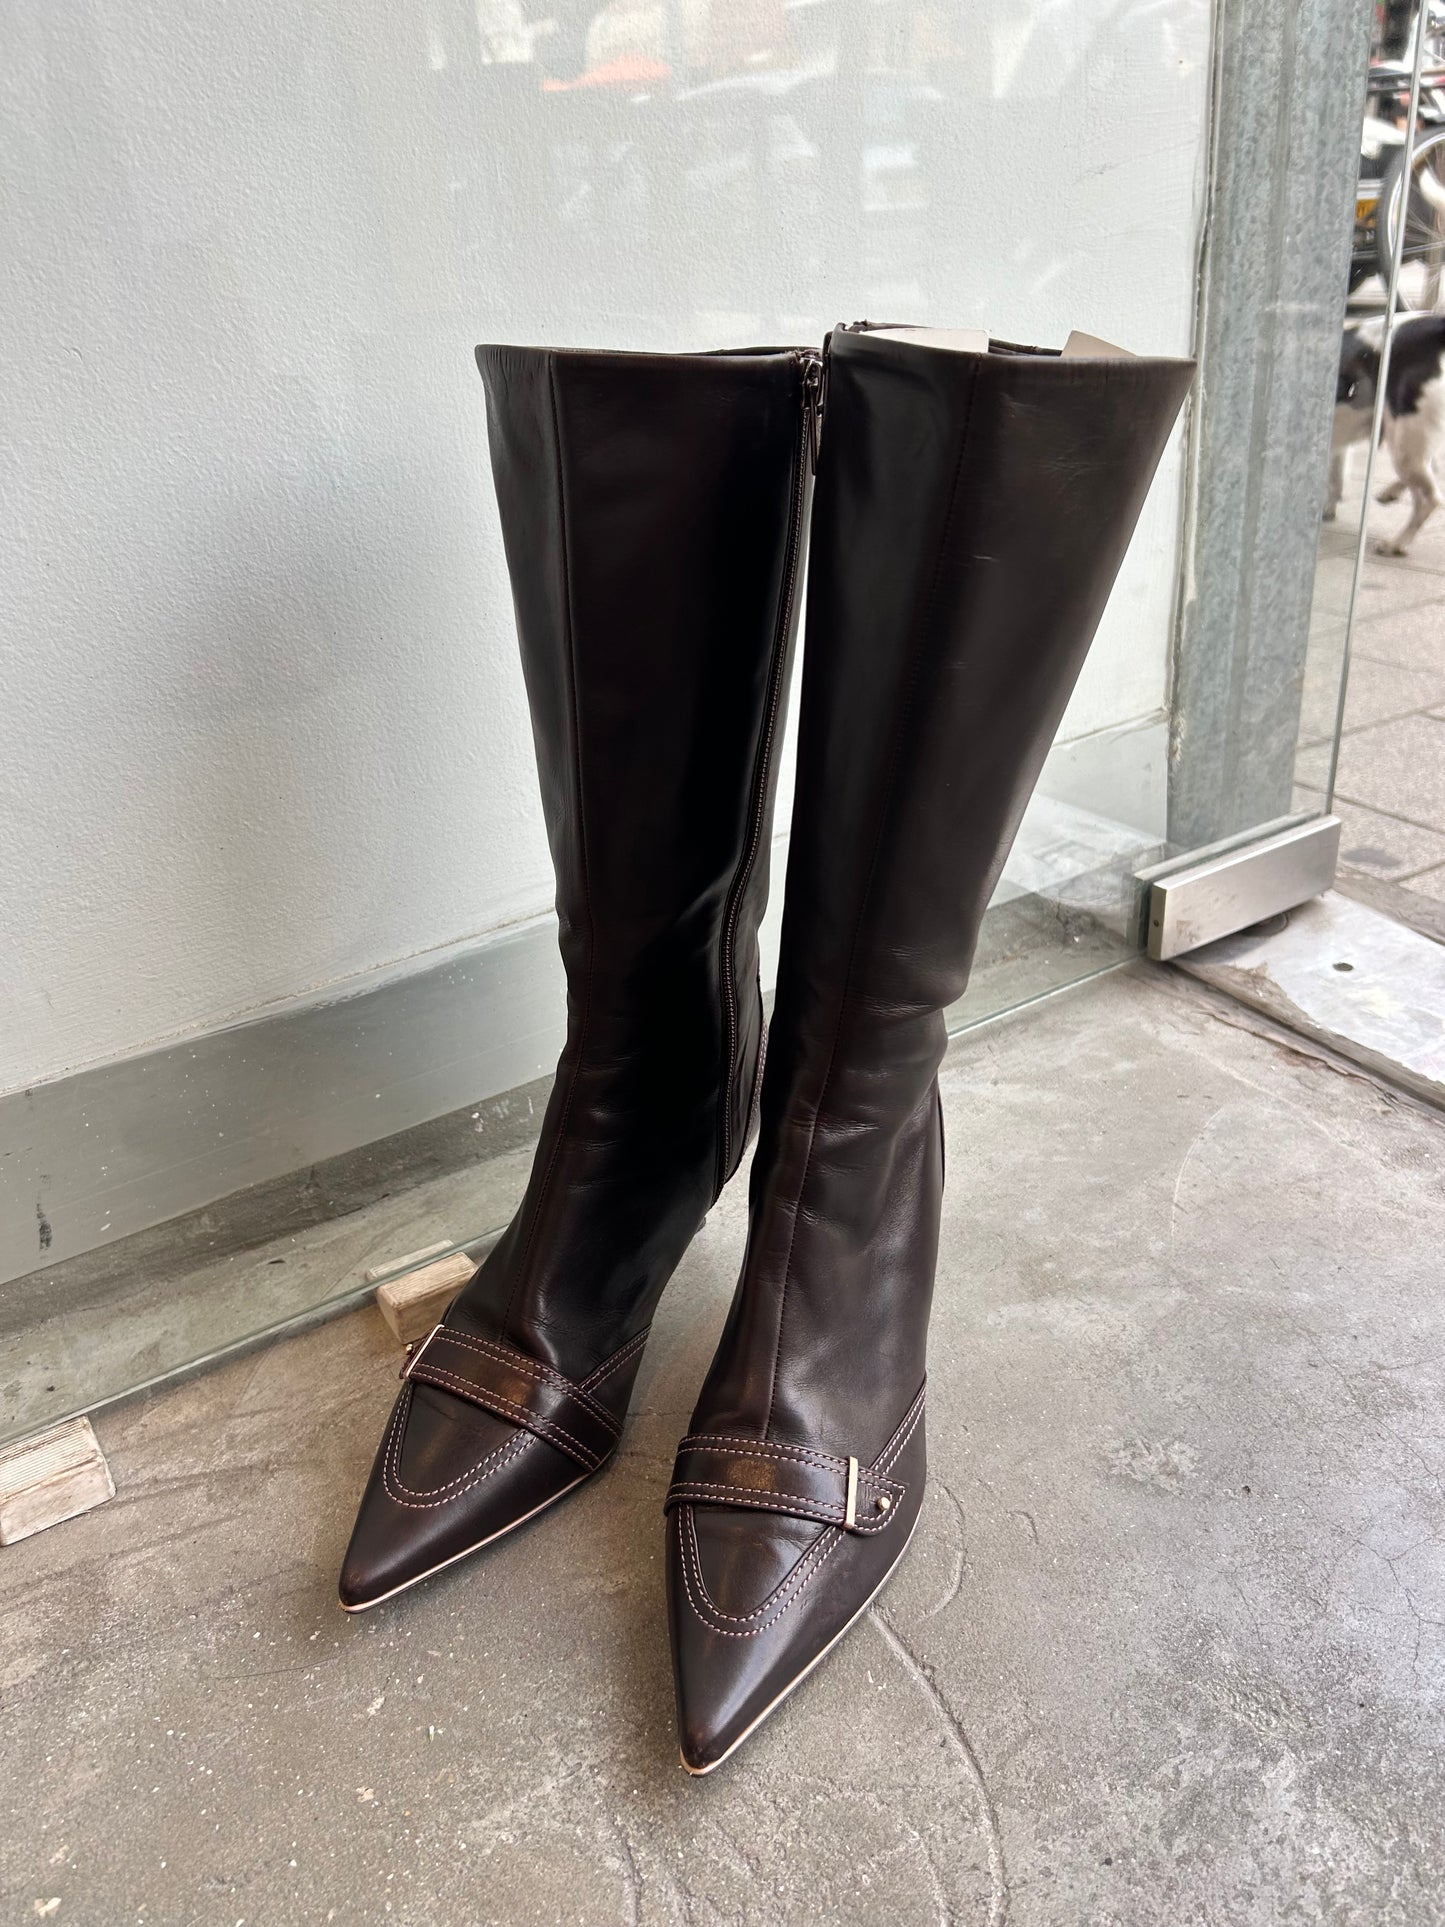 Japanese pointed heel boots